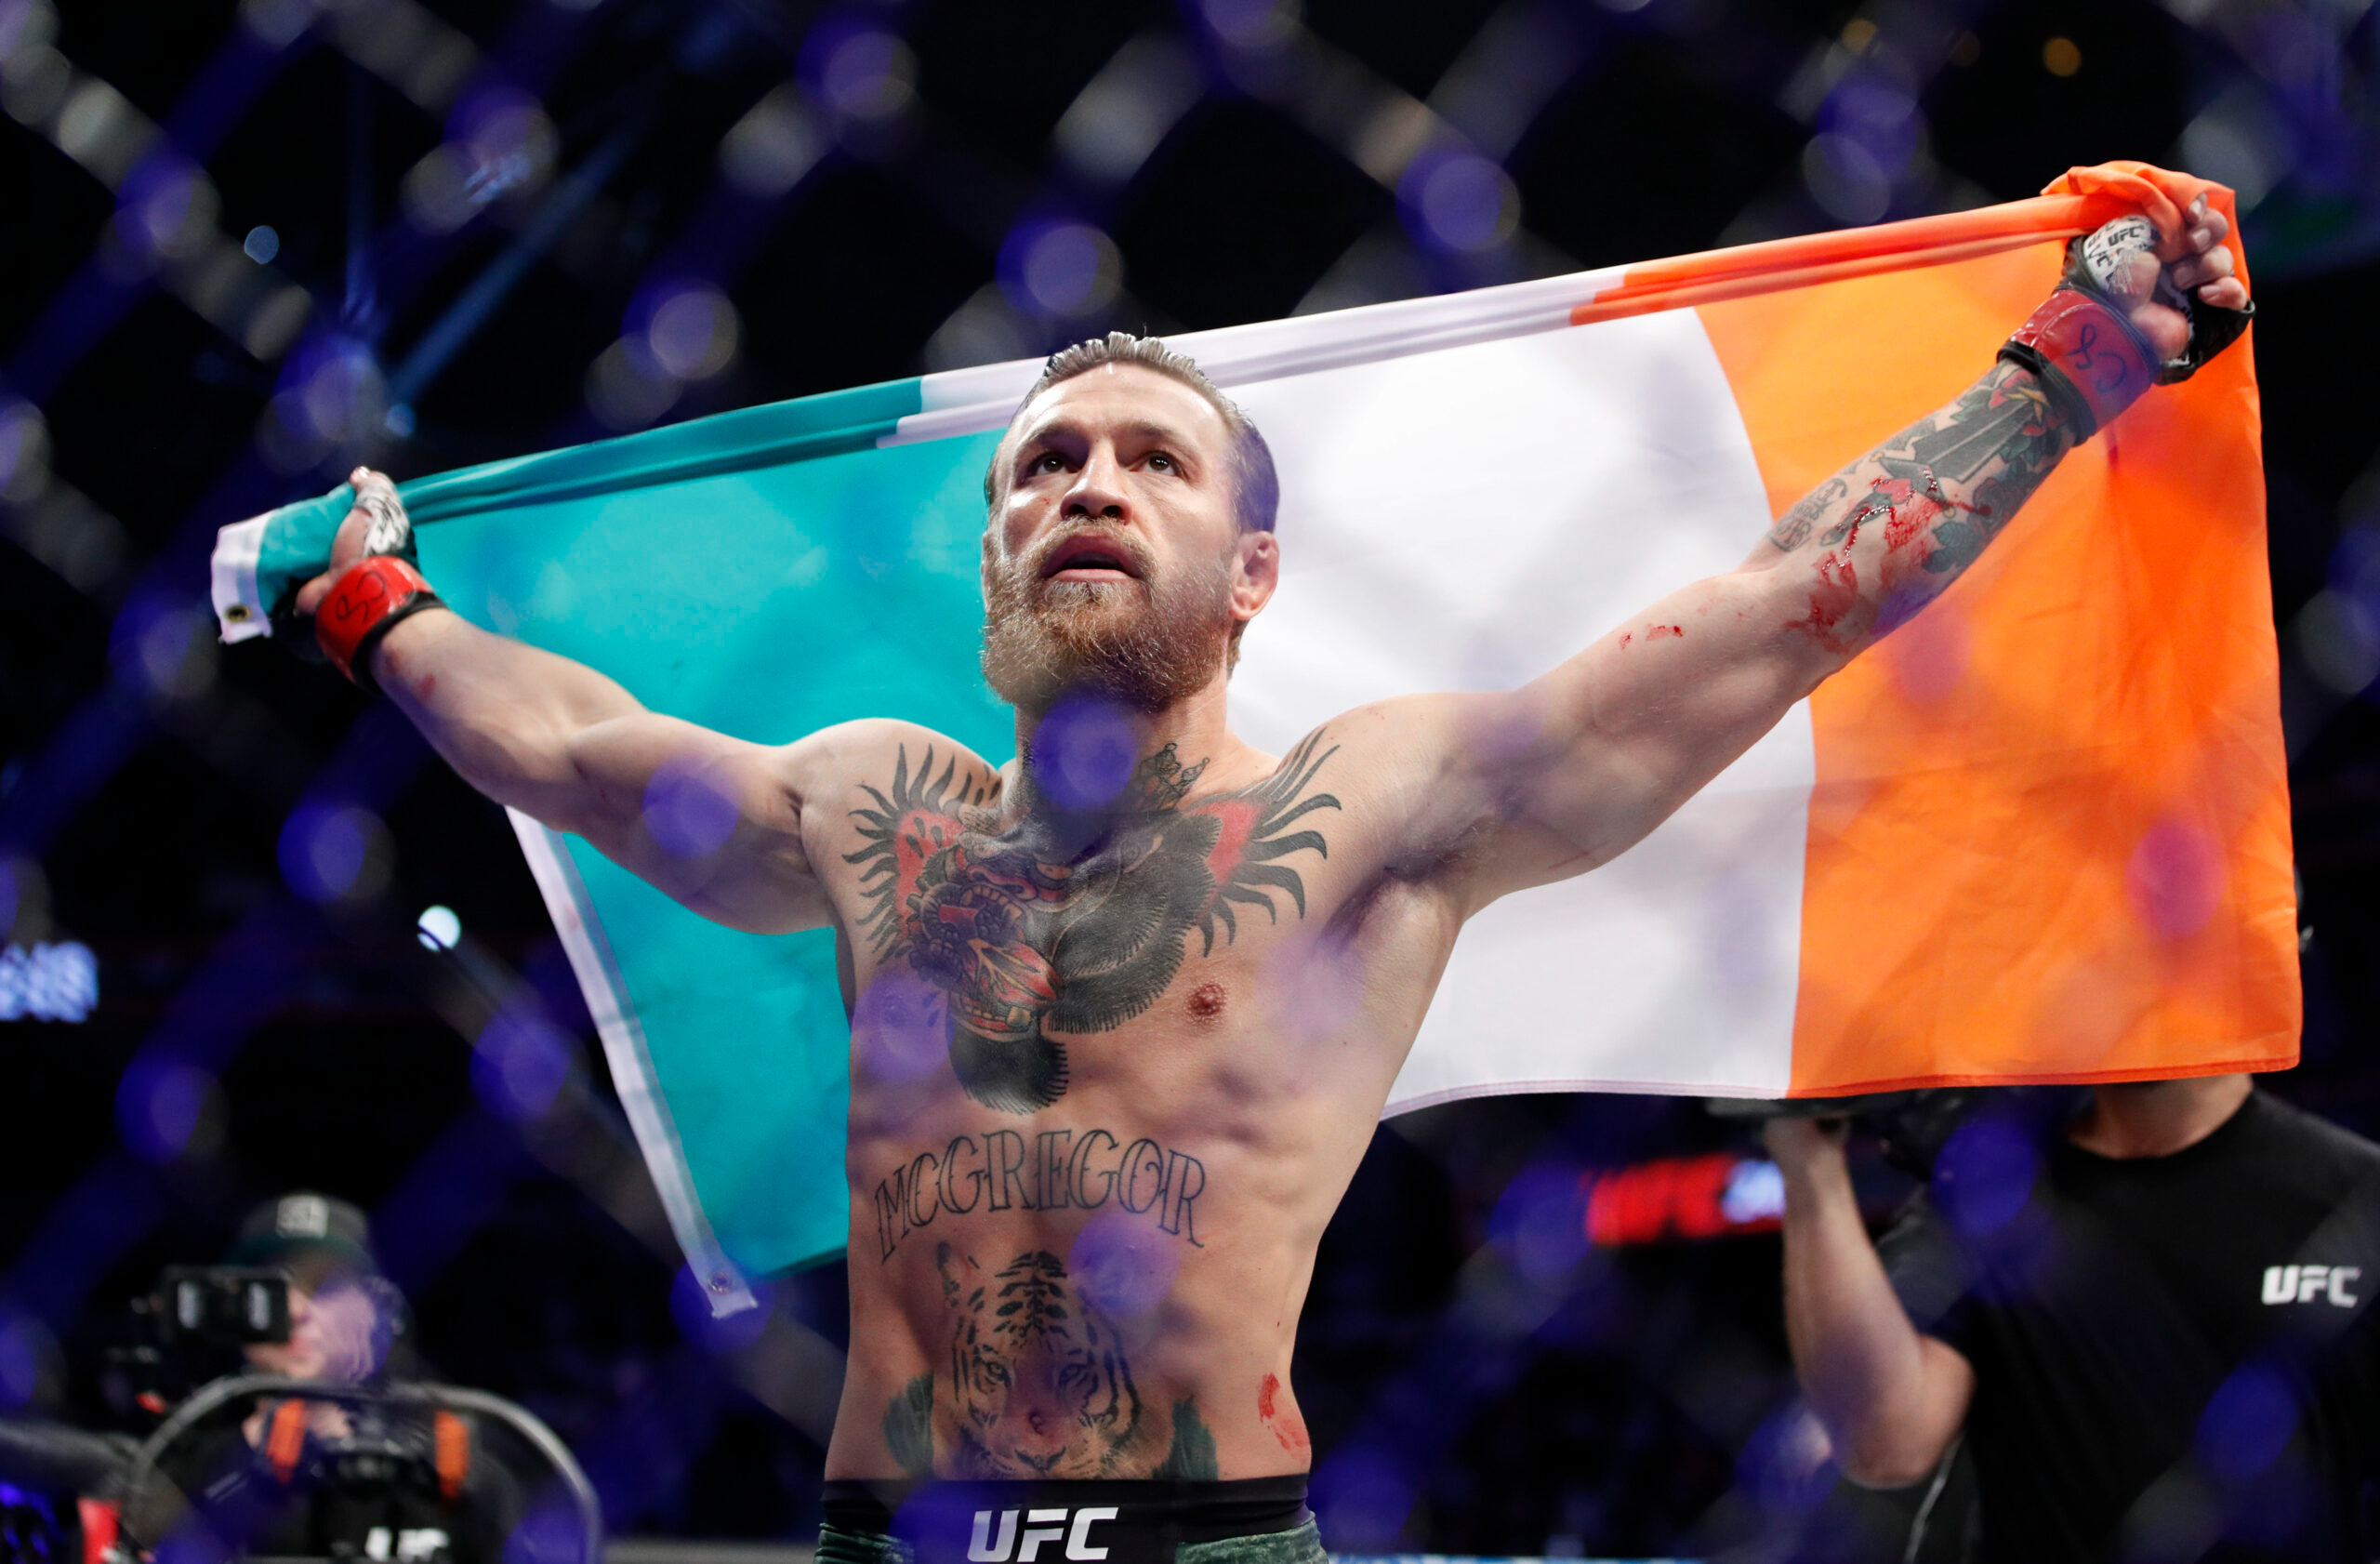 Irish Police To Check McGregor For Hate Speech